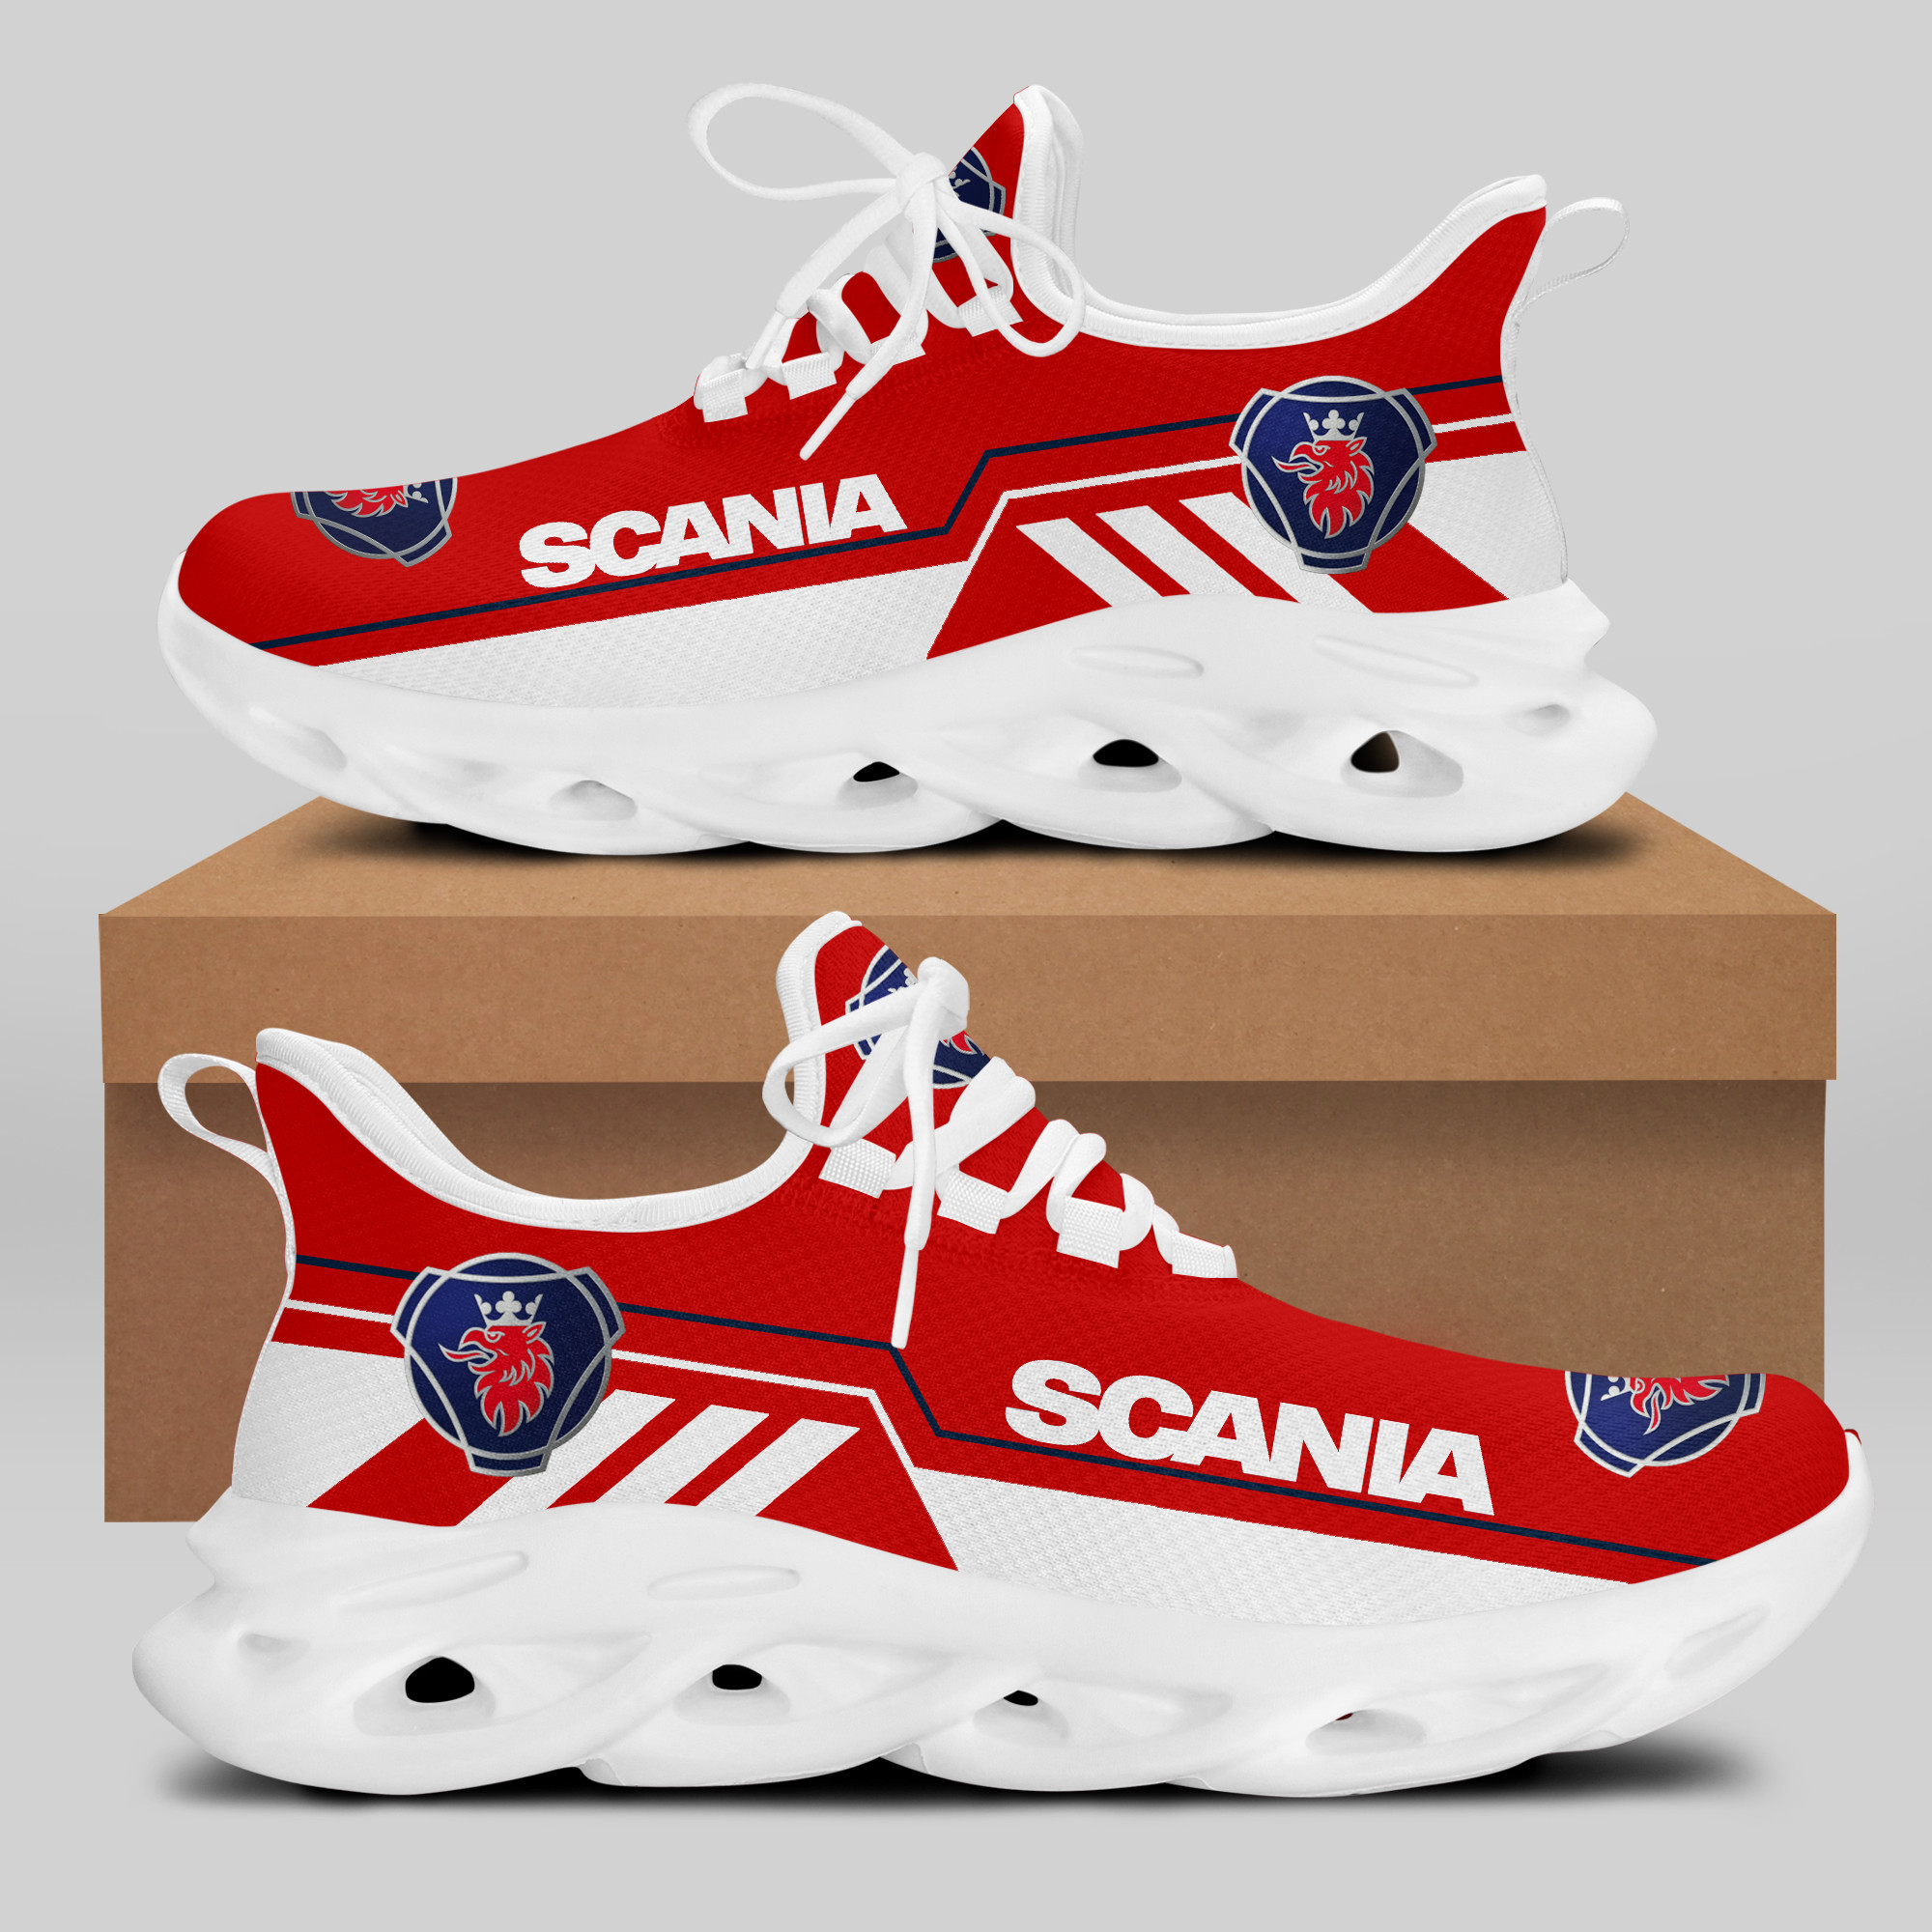 SCANIA RUNNING SHOES VER 15